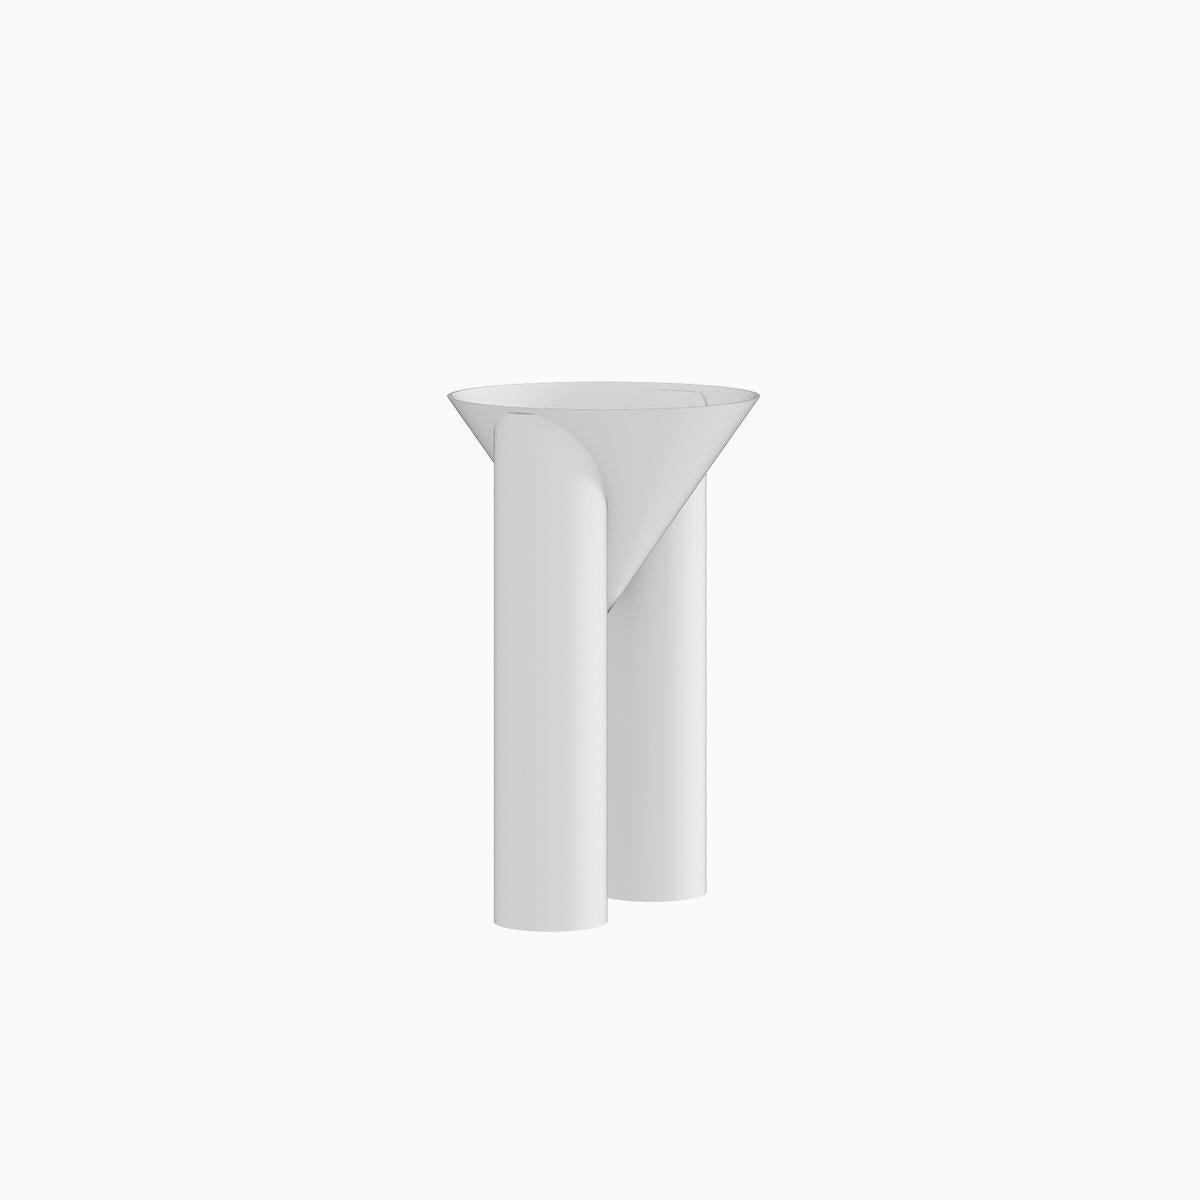 The Tall Valet Vase is crafted by hand in metal and coated with a matte electrostatic finish its diameter can be customize. 